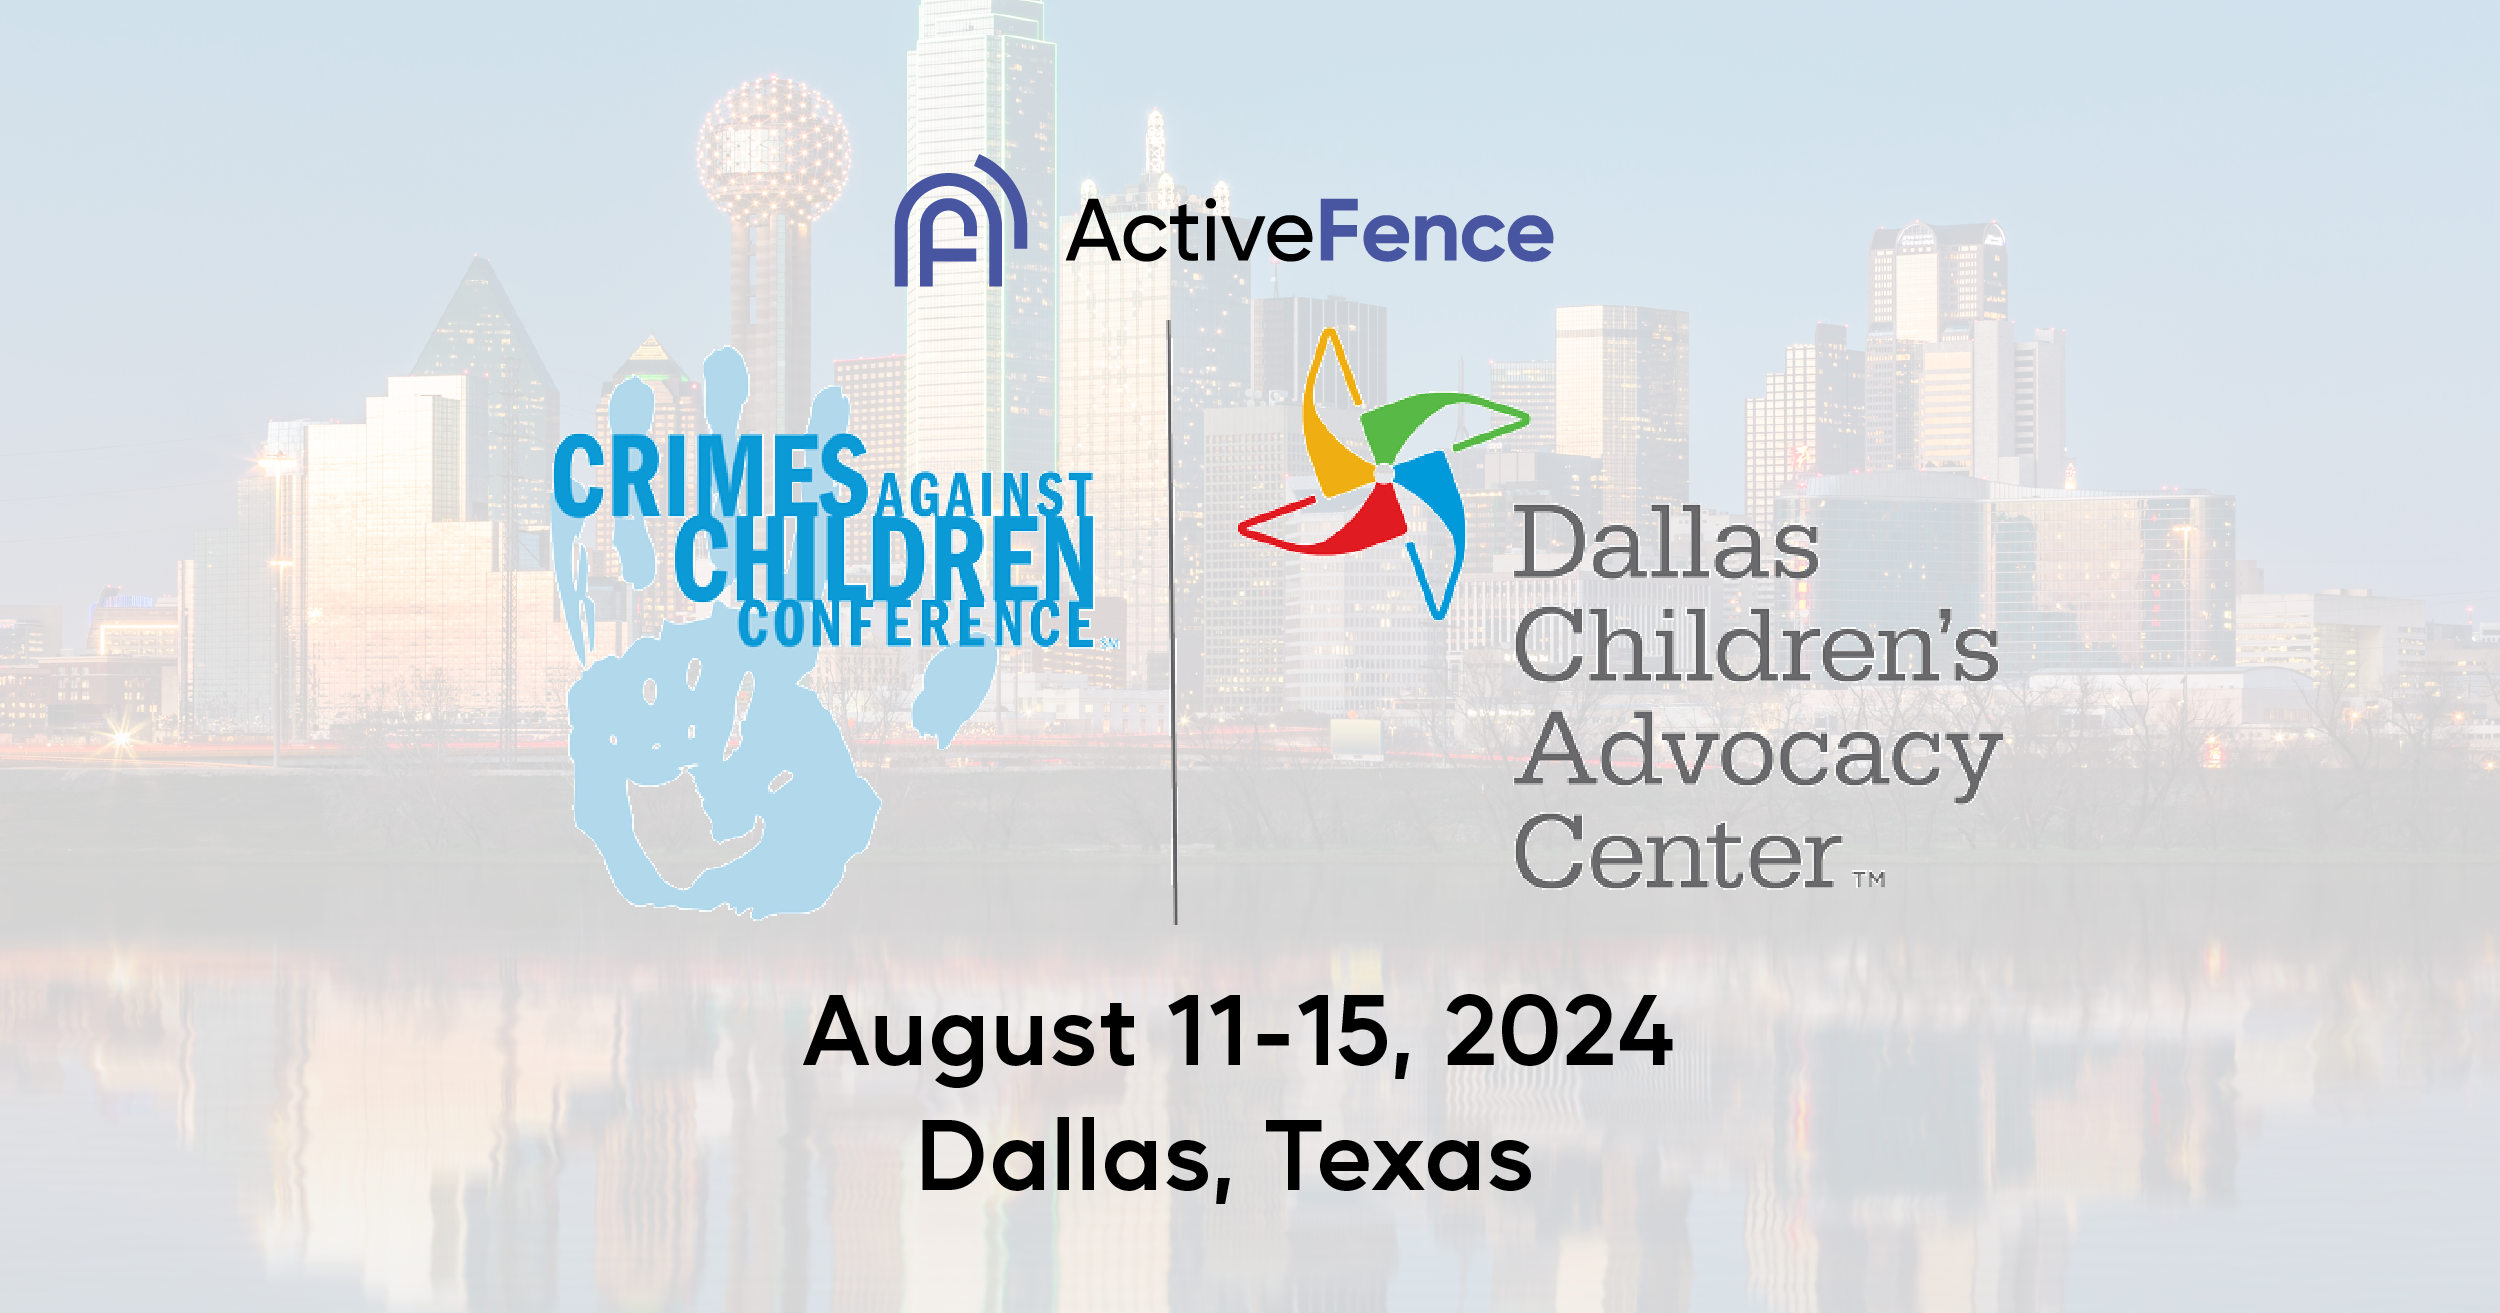 Banner for the Crimes Against Children Conference and Dallas Children's Advocacy Center, held on August 11-15, 2024 in Dallas, Texas.